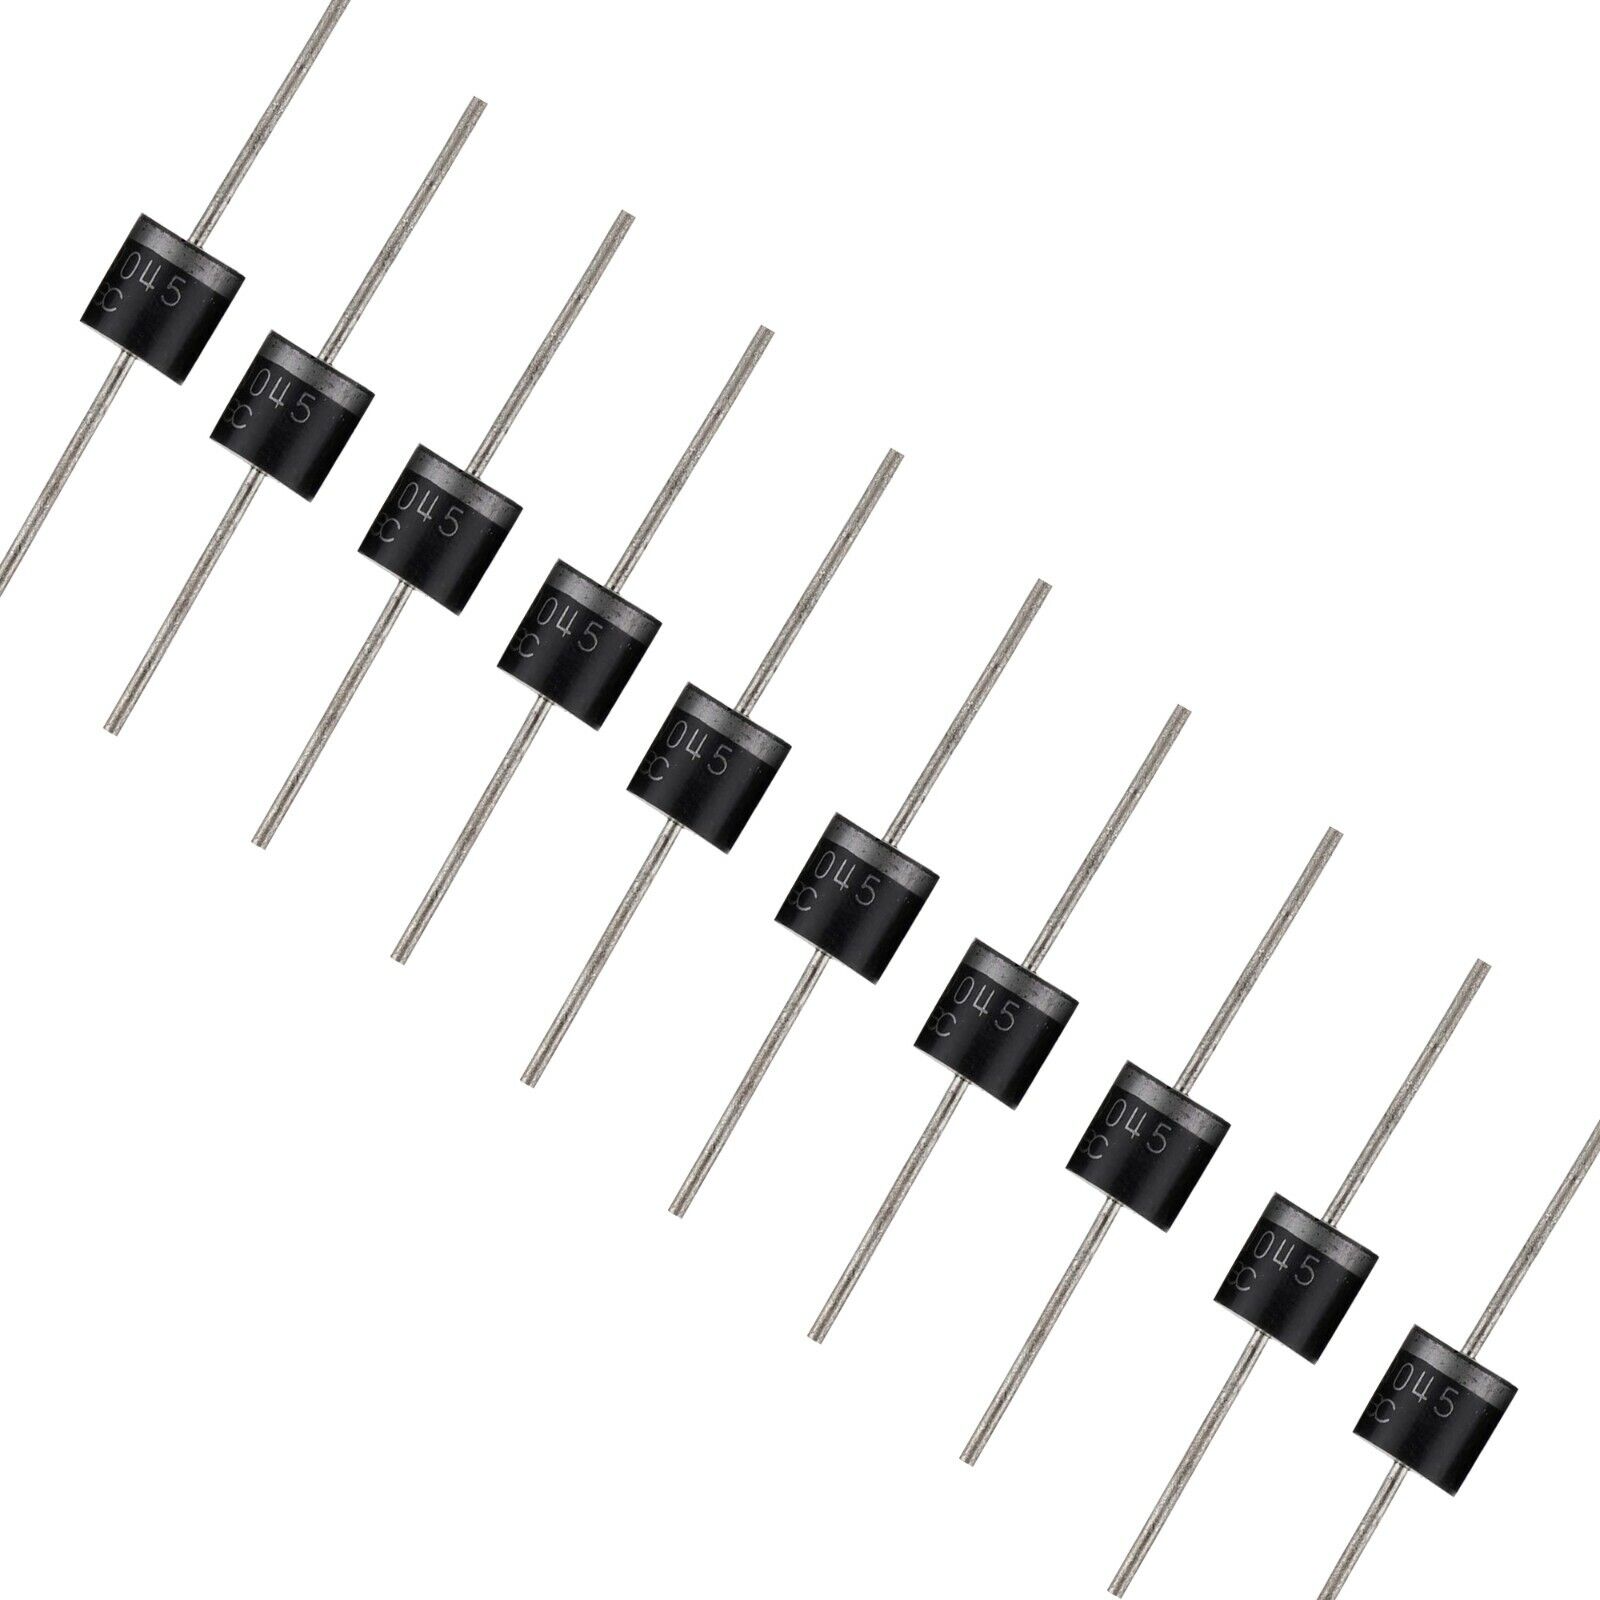 20Pc 15SQ045 Schottky Diode 15A 45V Axial 15amp 45Volt Electronic Silicon Diodes